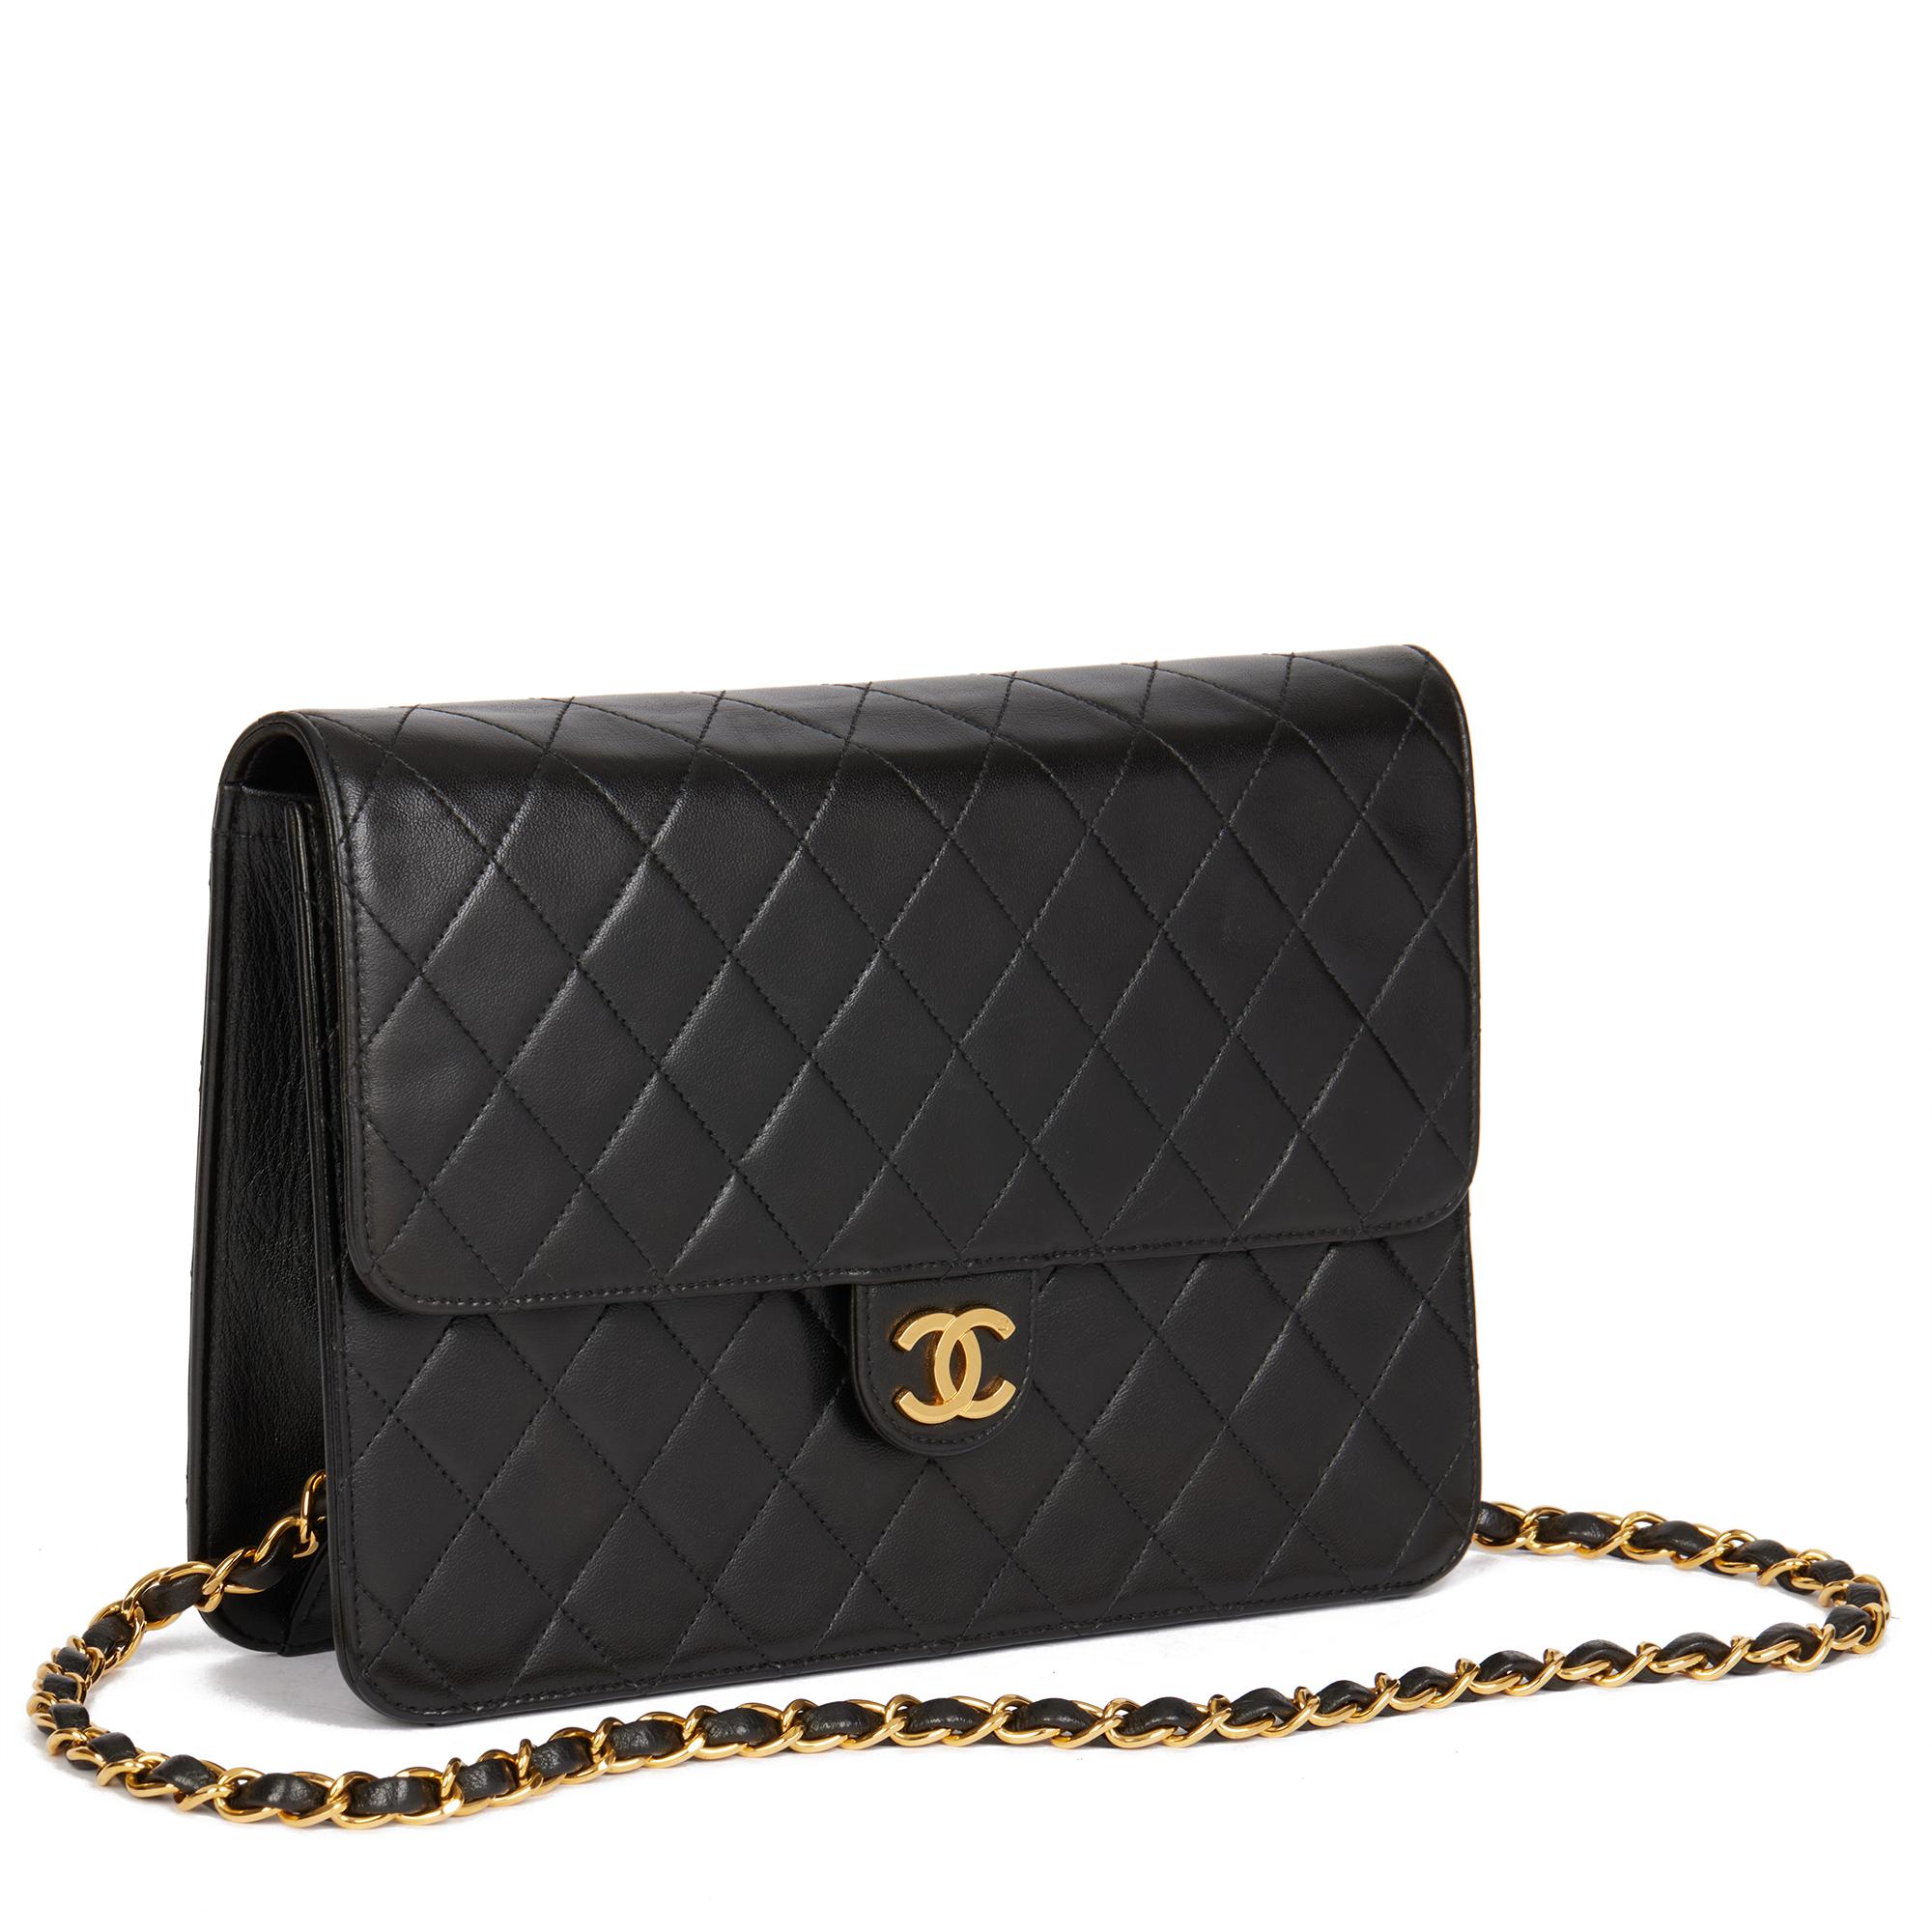 CHANEL
Black Quilted Lambskin Vintage Medium Classic Single Flap Bag

Serial Number: 5144668
Age (Circa): 1997
Accompanied By: Chanel Dust Bag, Authenticity Card, Care Booklet
Authenticity Details: Authenticity Card, Serial Sticker (Made in